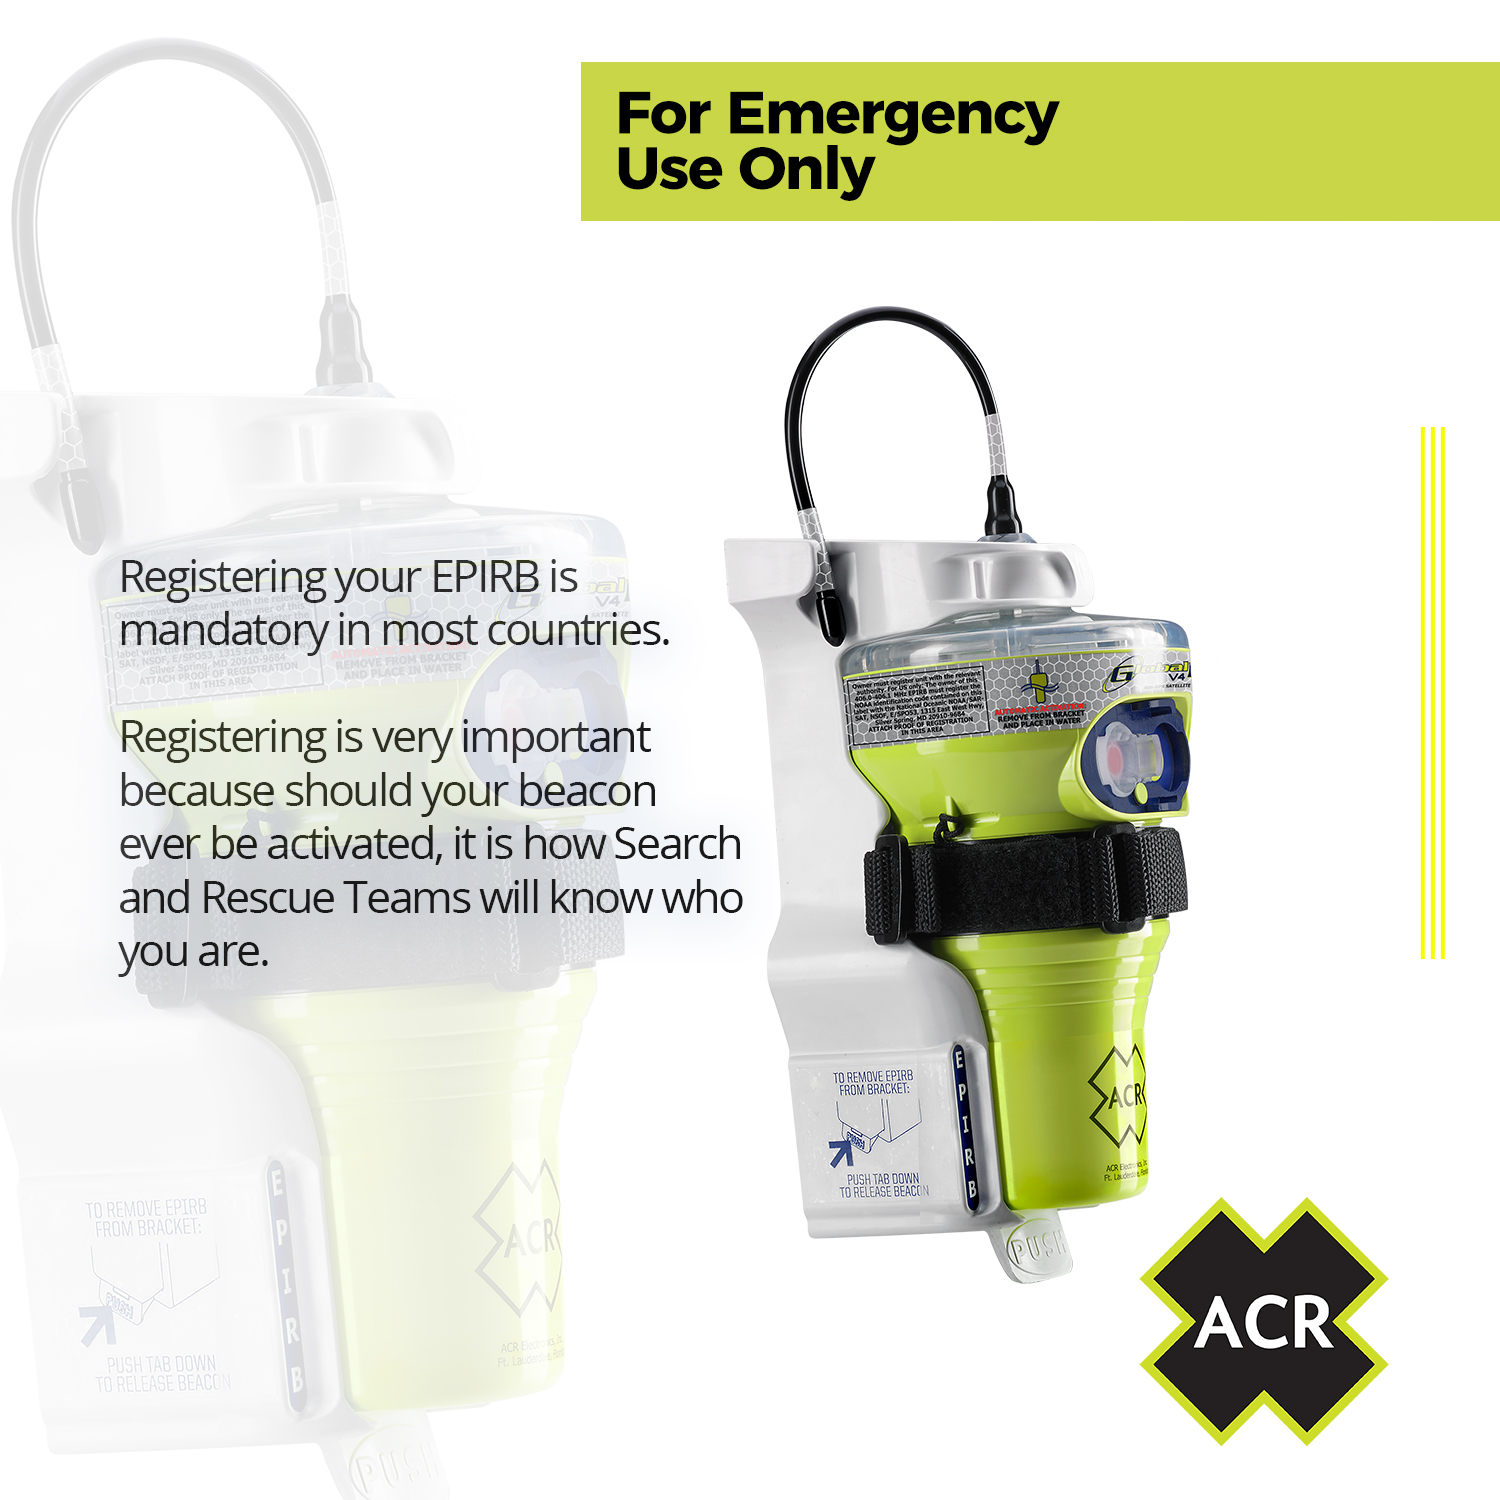 ACR GlobalFix V4 GPS EPIRB W/ Manual Release (Category 2) | Emergency Distress Beacon | High Impact UV Resistant Emergency Position Indicating Radio Beacon - image 2 of 6